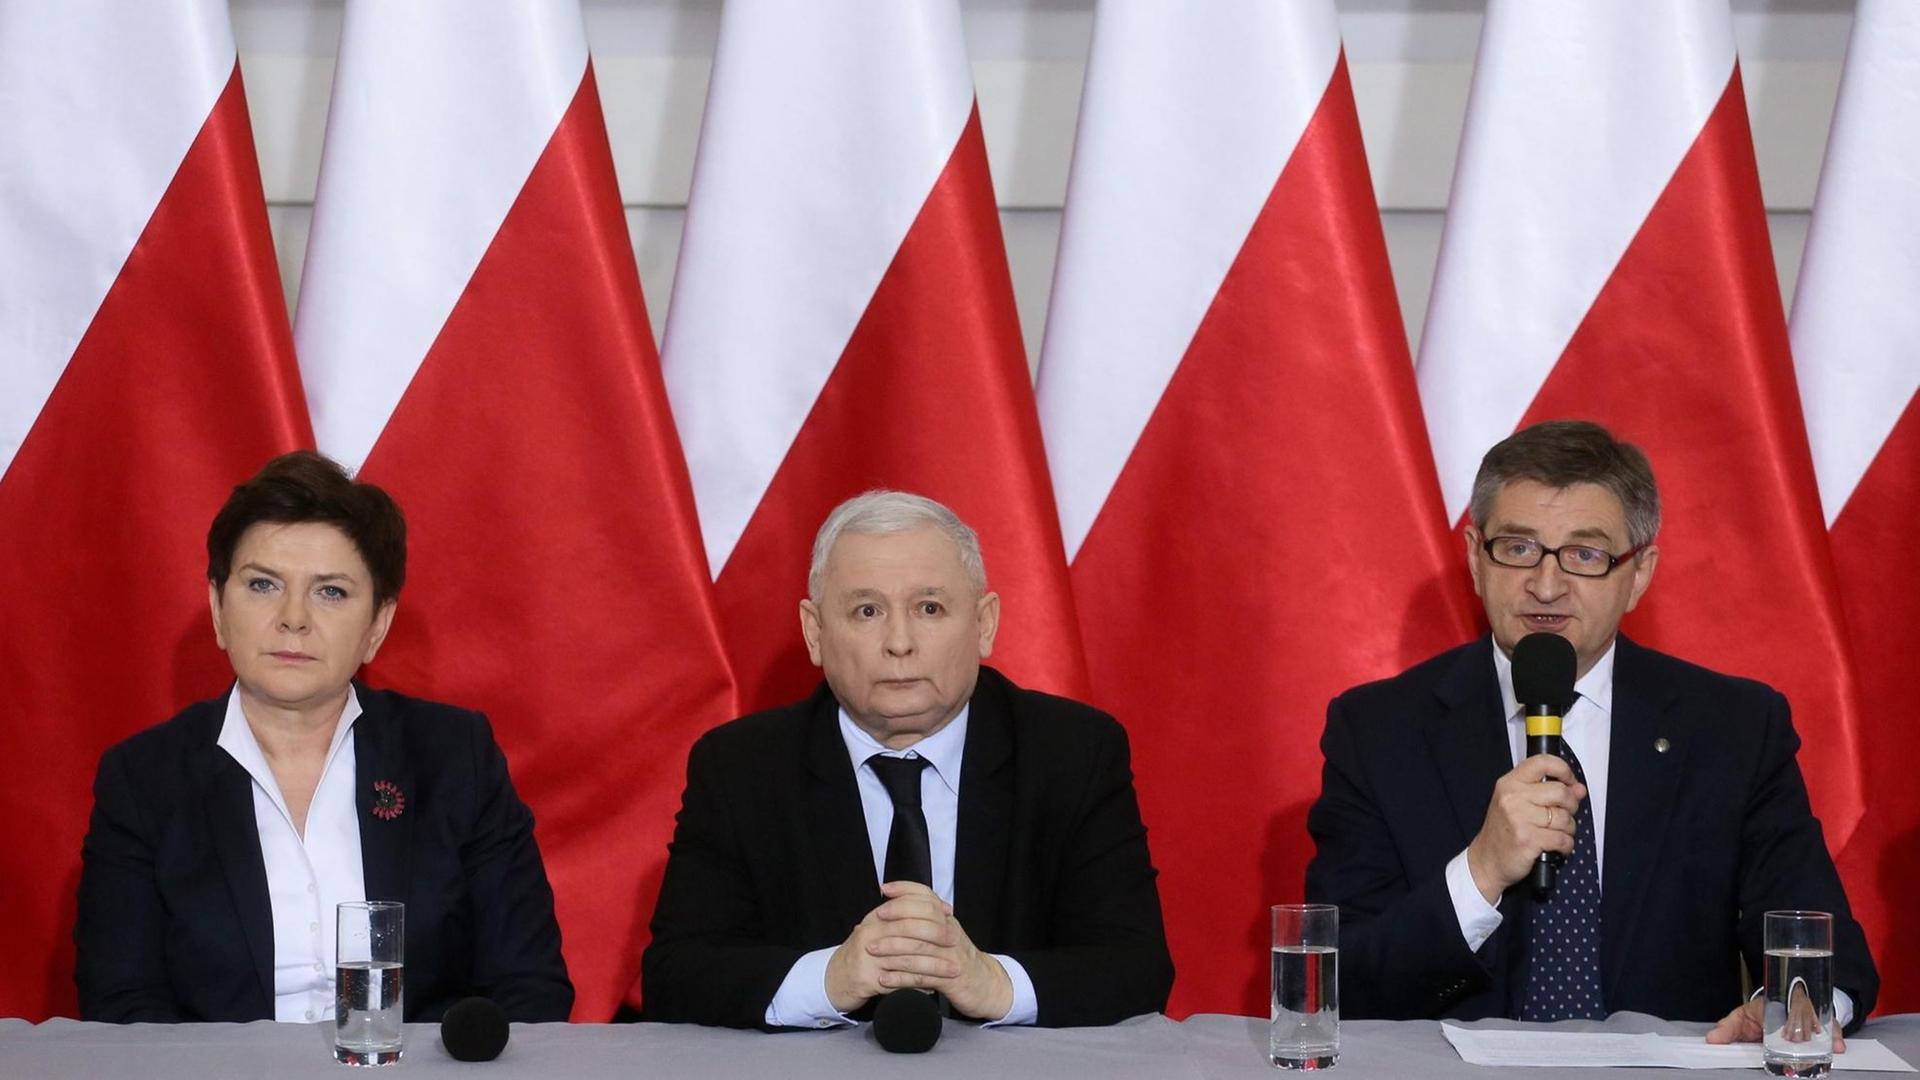 Polish Law and Justice (PiS) party leader Jaroslaw Kaczynski (C) is flanked by Polish Prime Minister Beata Szydlo (L) and the Speaker of the 'Sejm'parliament, Marek Kuchcinski (R), during a news conference in Warsaw, Poland, 21 December 2016. The conference was devoted to the situation in the Polish 'Sejm' parliament.